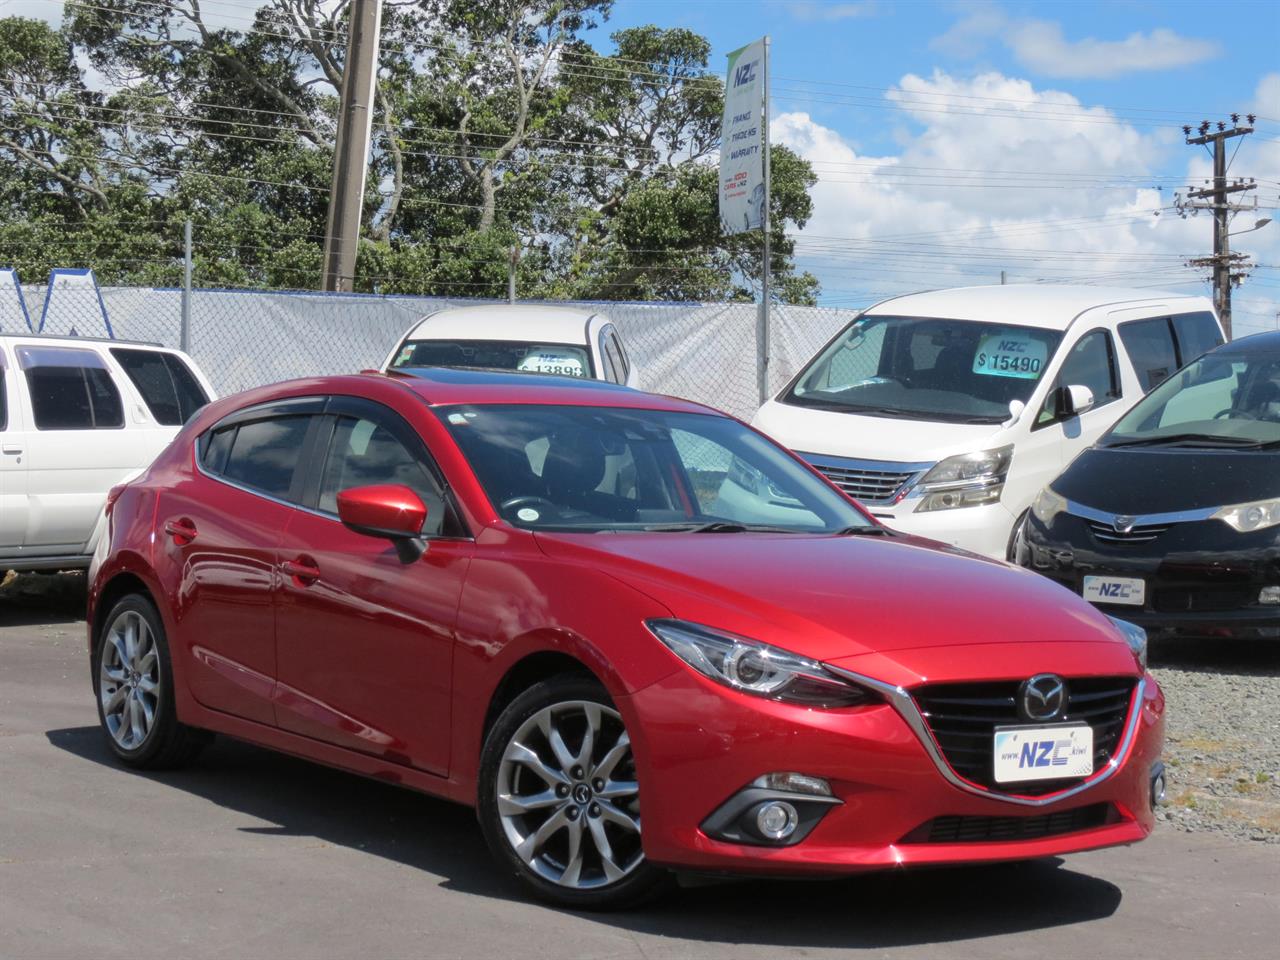 NZC 2014 Mazda Axela just arrived to Auckland